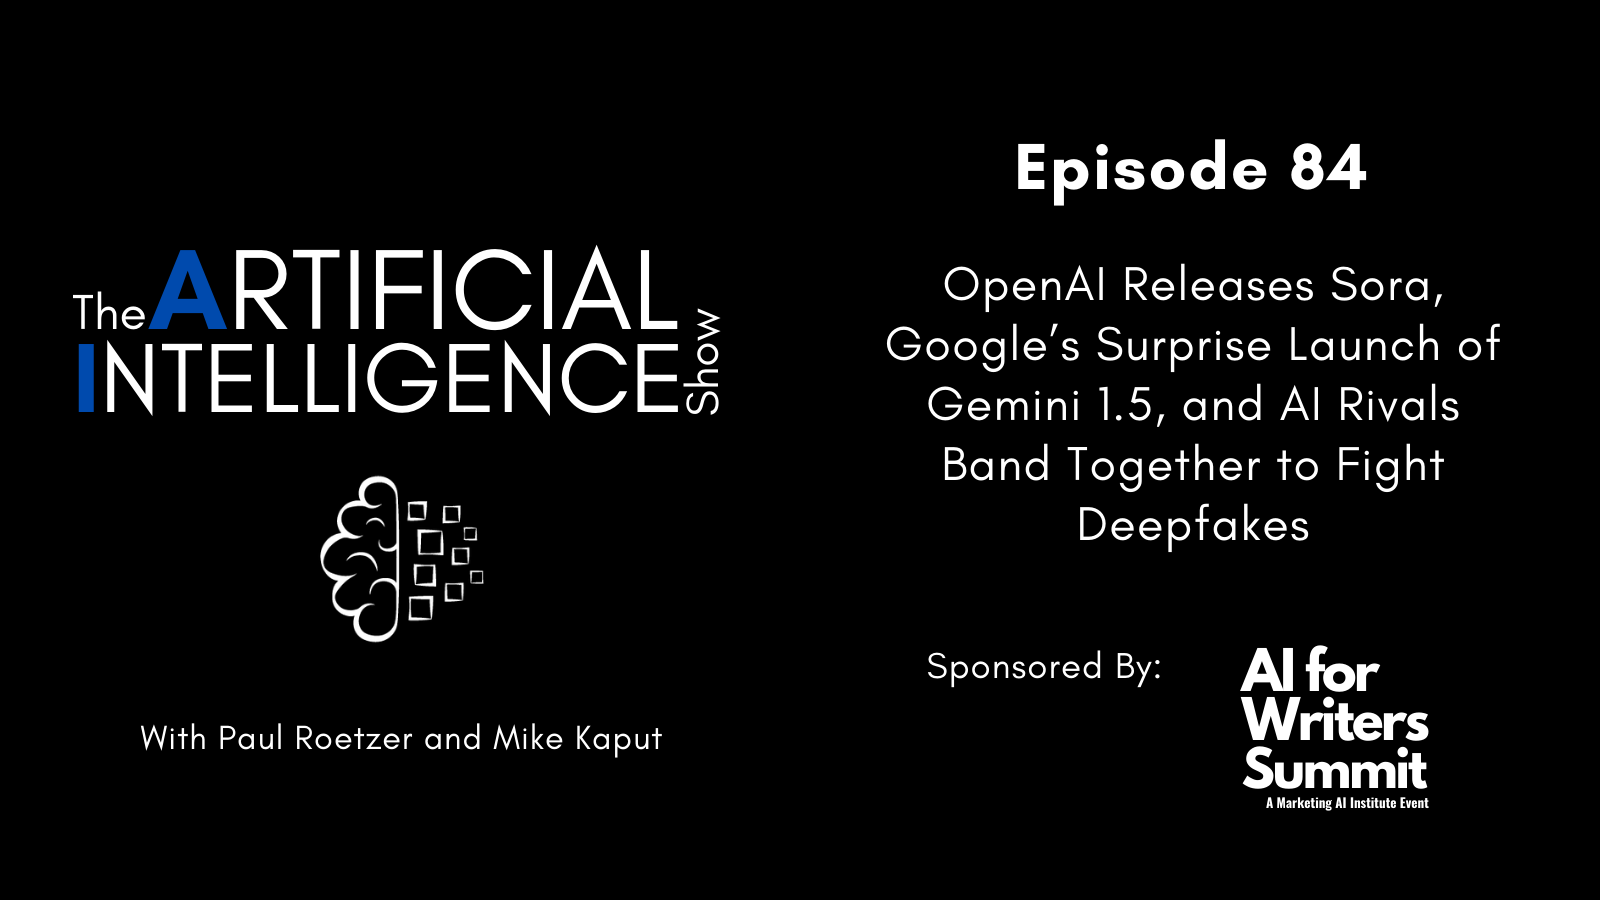 [The AI Show Episode 84]: OpenAI Releases Sora, Googles Surprise Launch of Gemini 1.5, and AI Rivals Band Together to Fight Deepfakes [Video]